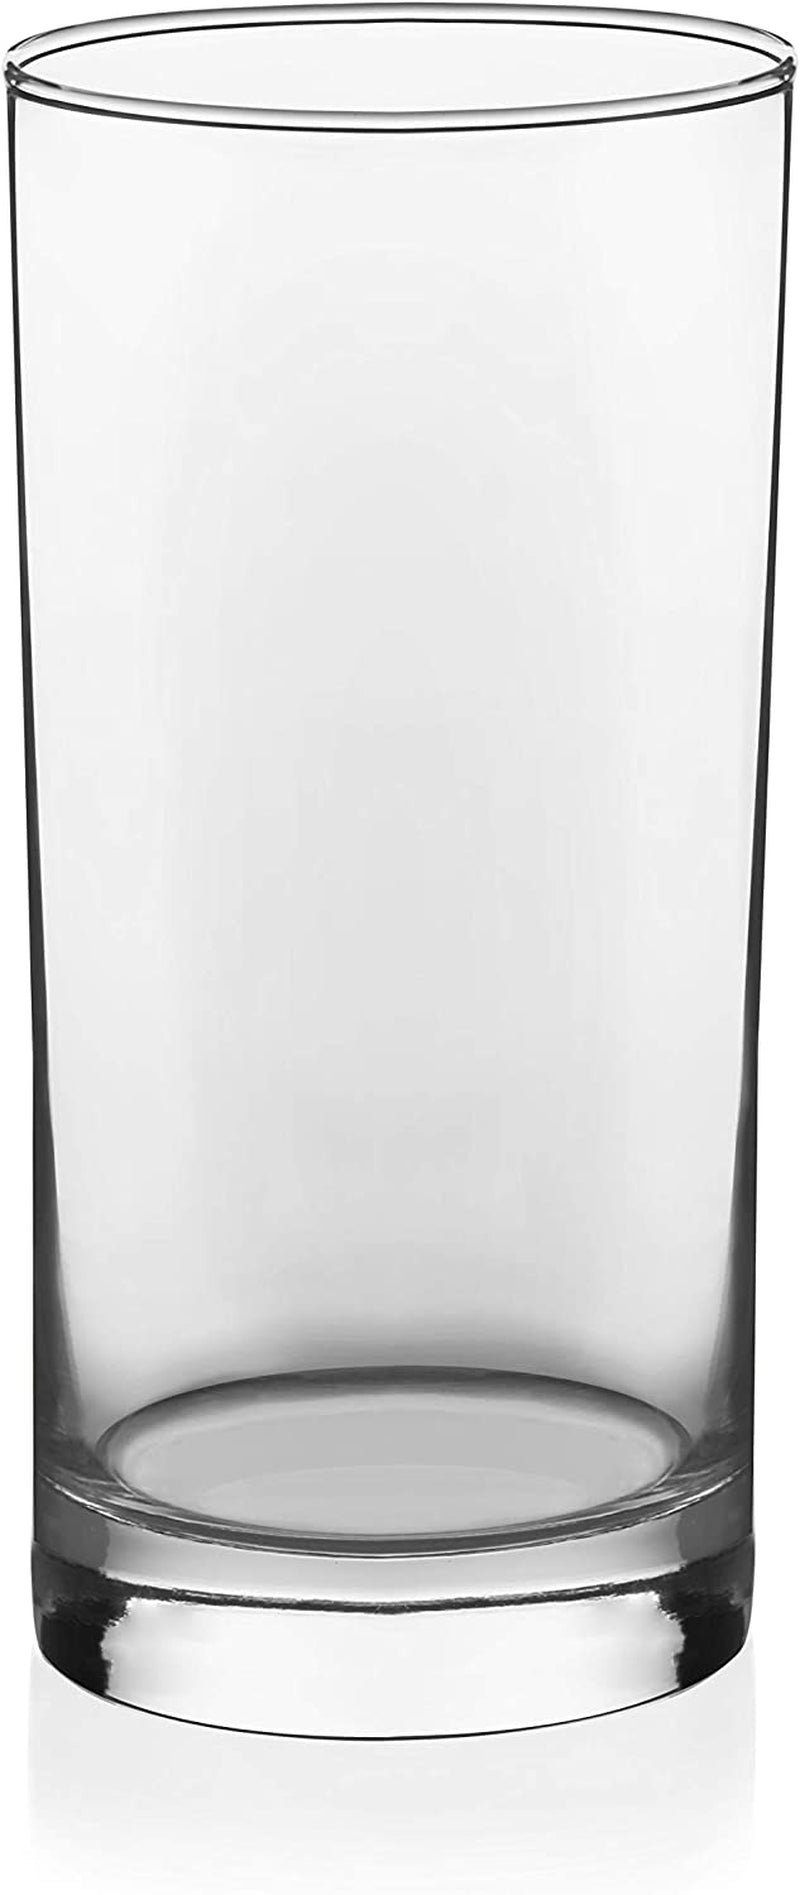 Libbey Province 16-Piece Tumbler and Rocks Glass Set Home & Garden > Kitchen & Dining > Tableware > Drinkware Libbey   